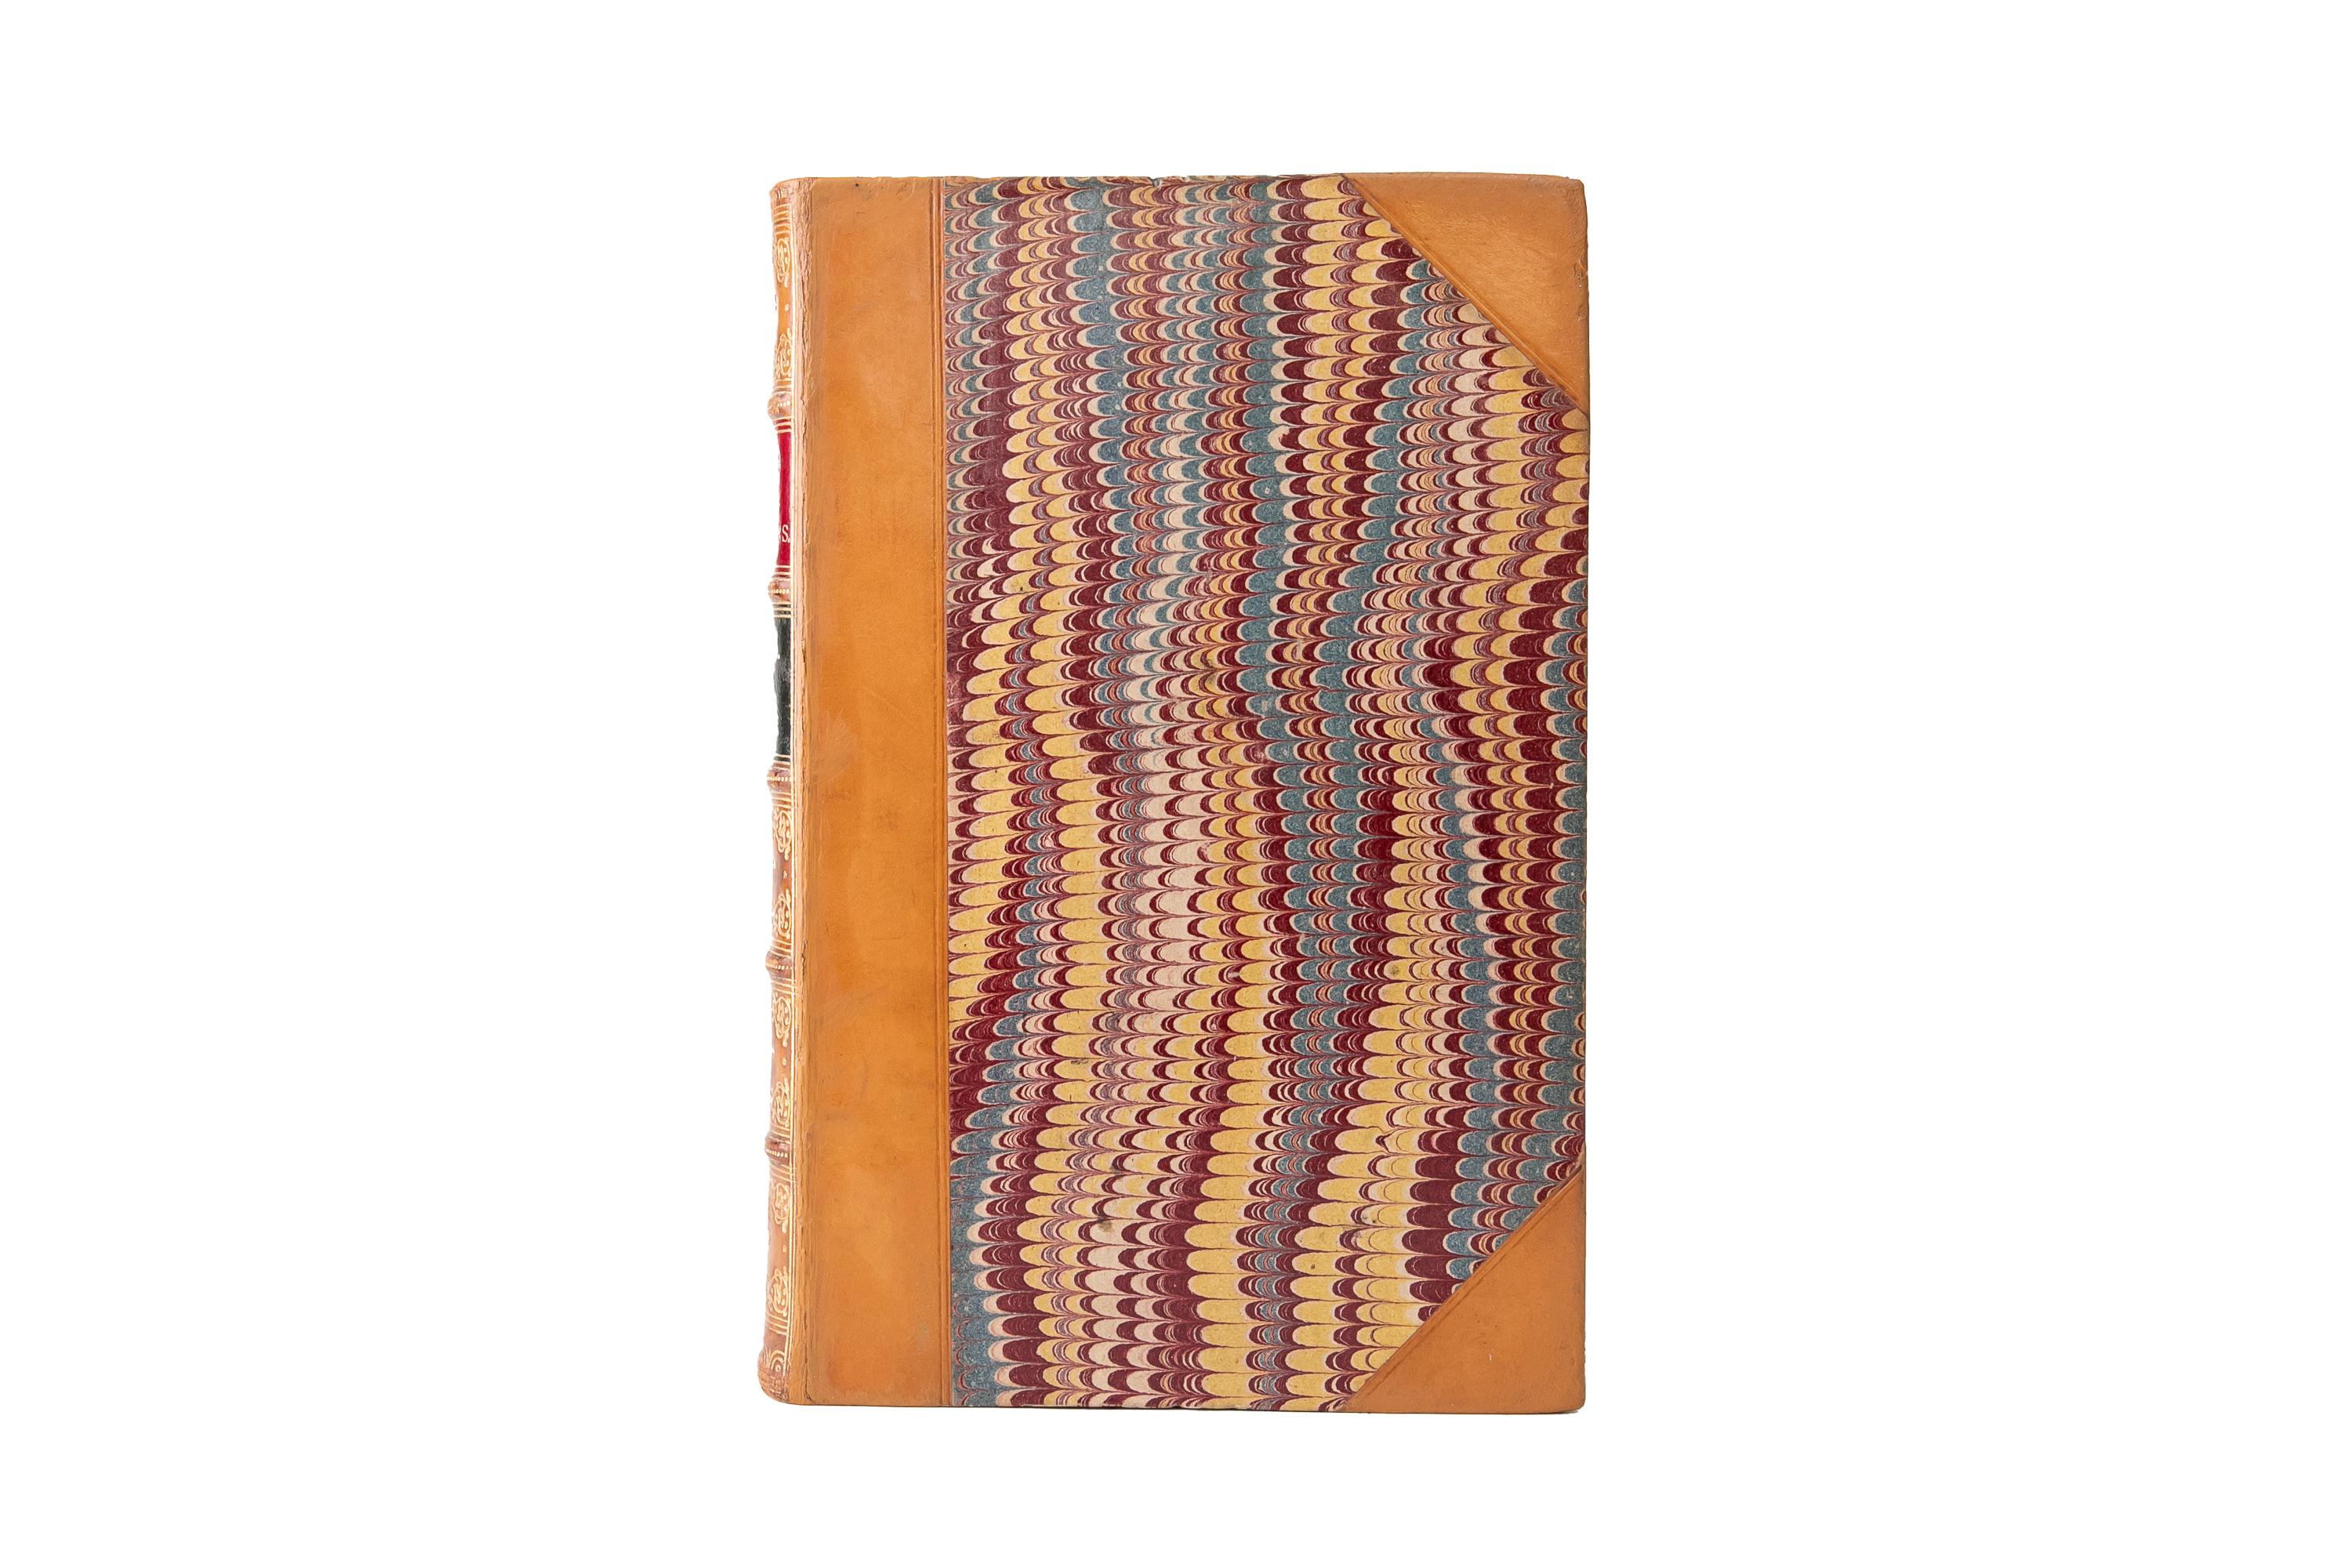 2 Volumes. Austen Henry Layard, Nineveh and its Remains. First Edition. Bound in 3/4 tan calf and marbled boards. The raised band spine is gilt-tooled with red and green morocco labels. All of the edges are marbled with marbled endpapers. Includes